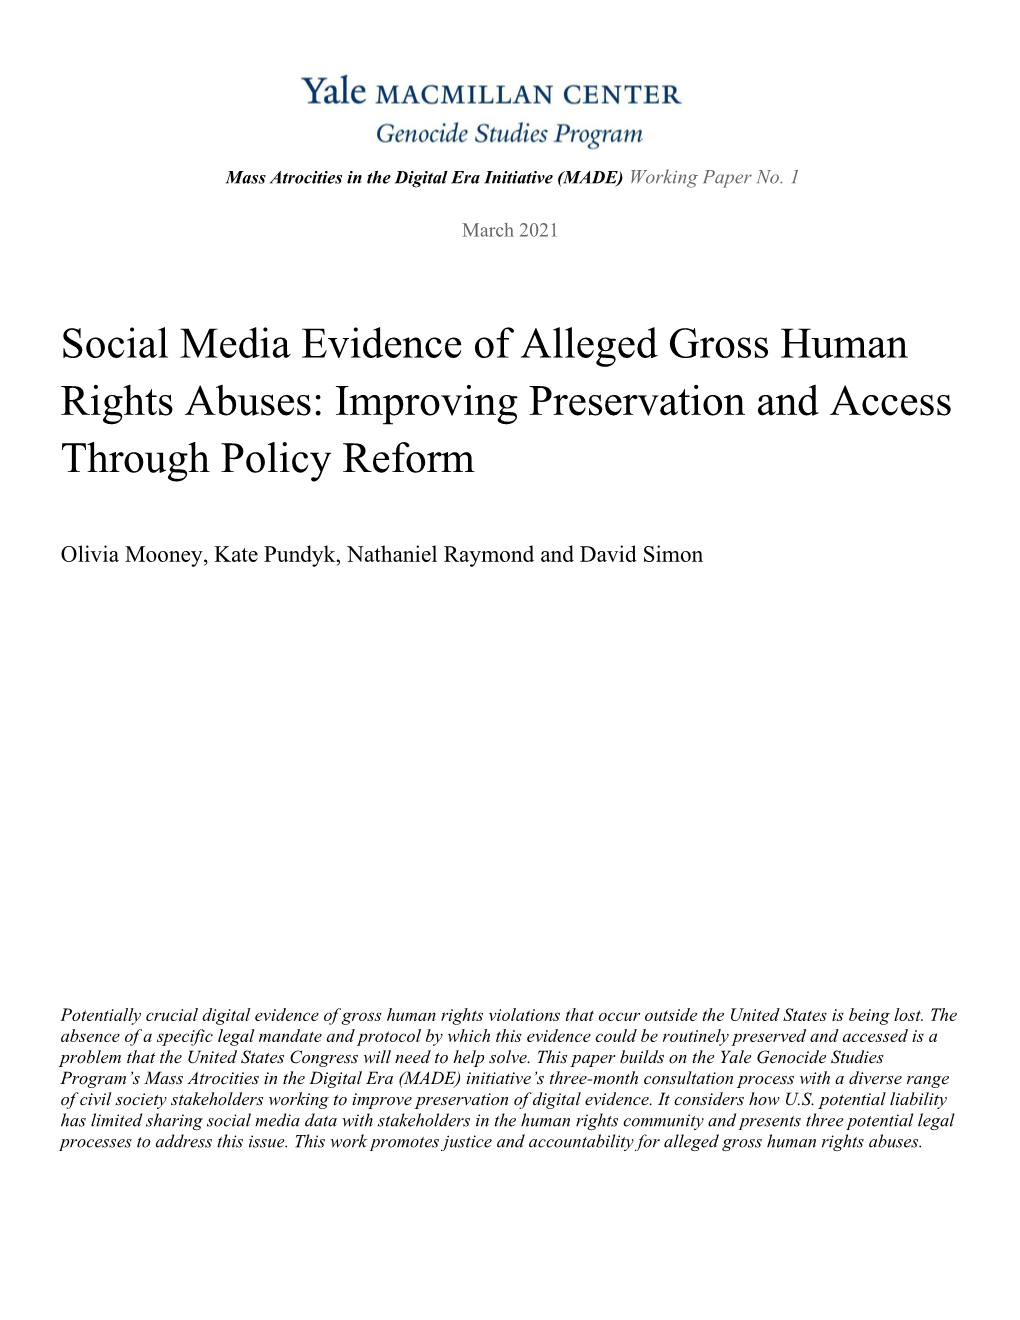 Social Media Evidence of Alleged Gross Human Rights Abuses: Improving Preservation and Access Through Policy Reform